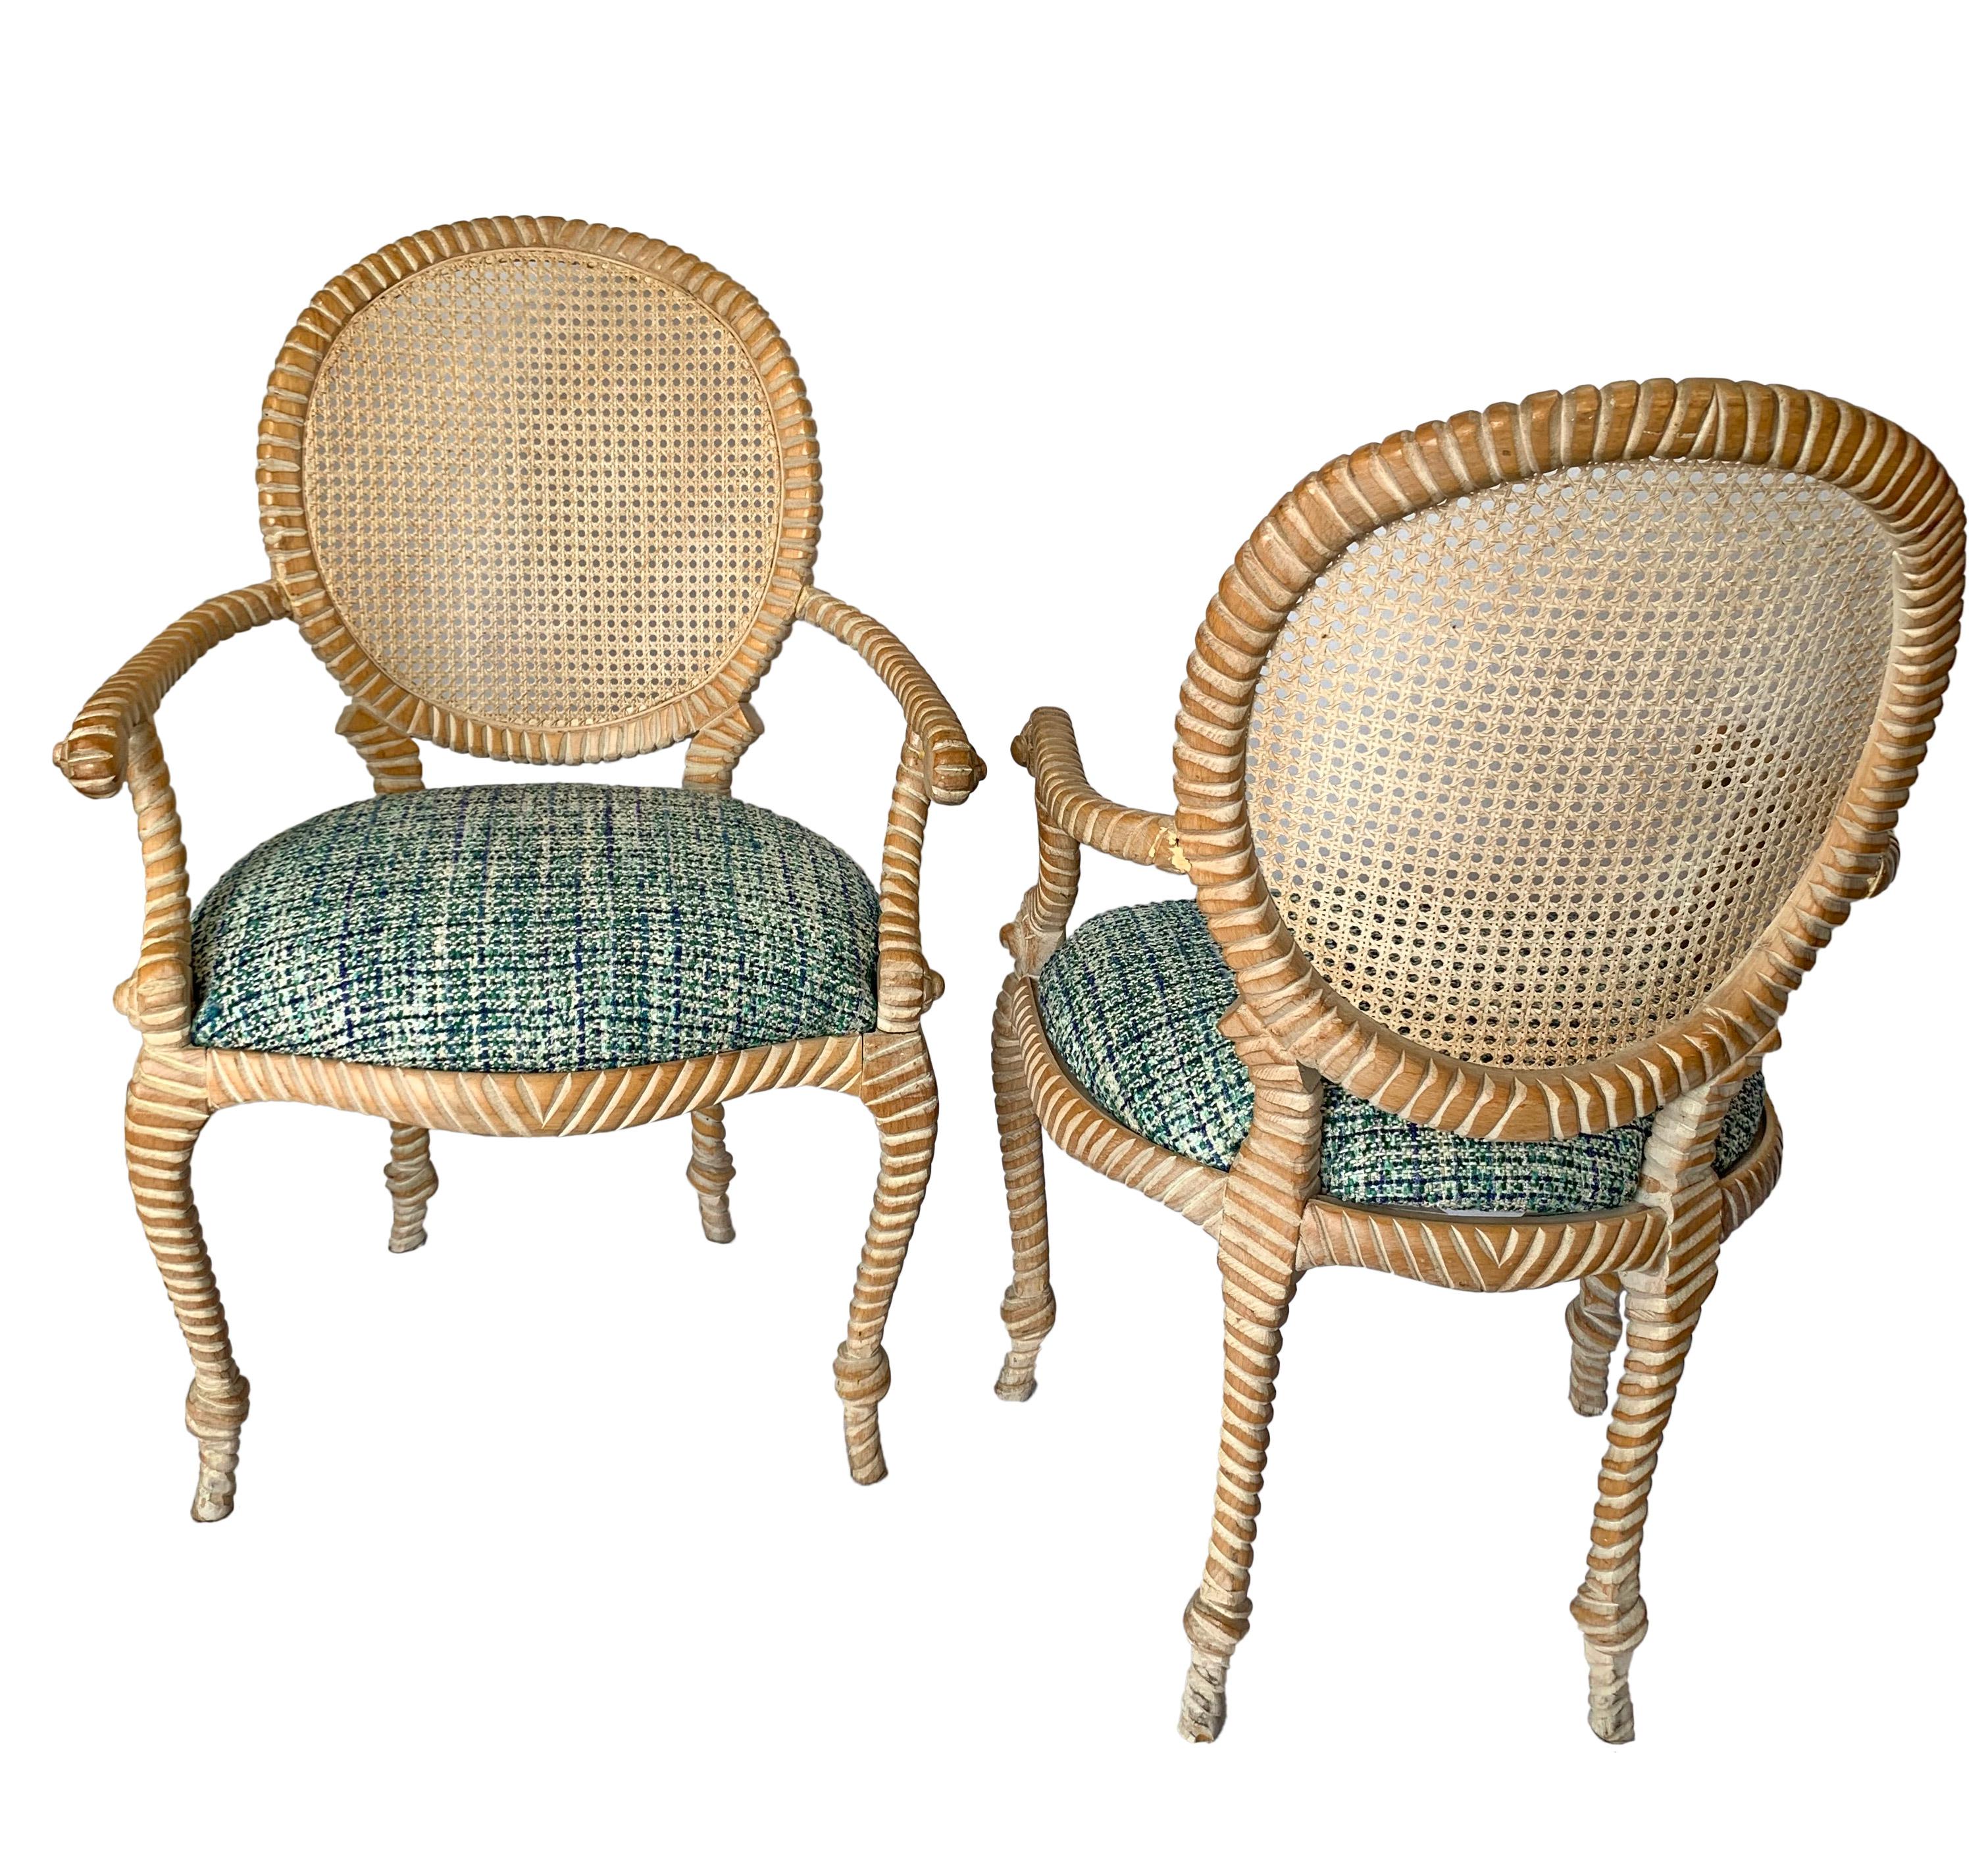 Pair of Napoleon III classic rope chairs with caned backs from 1960s. Few pieces of furniture can claim to have origins as diverse as the classic rope chair. Created by the Parisian upholsterer A.M.E. Fournier in the 1860s, his exceptionally carved